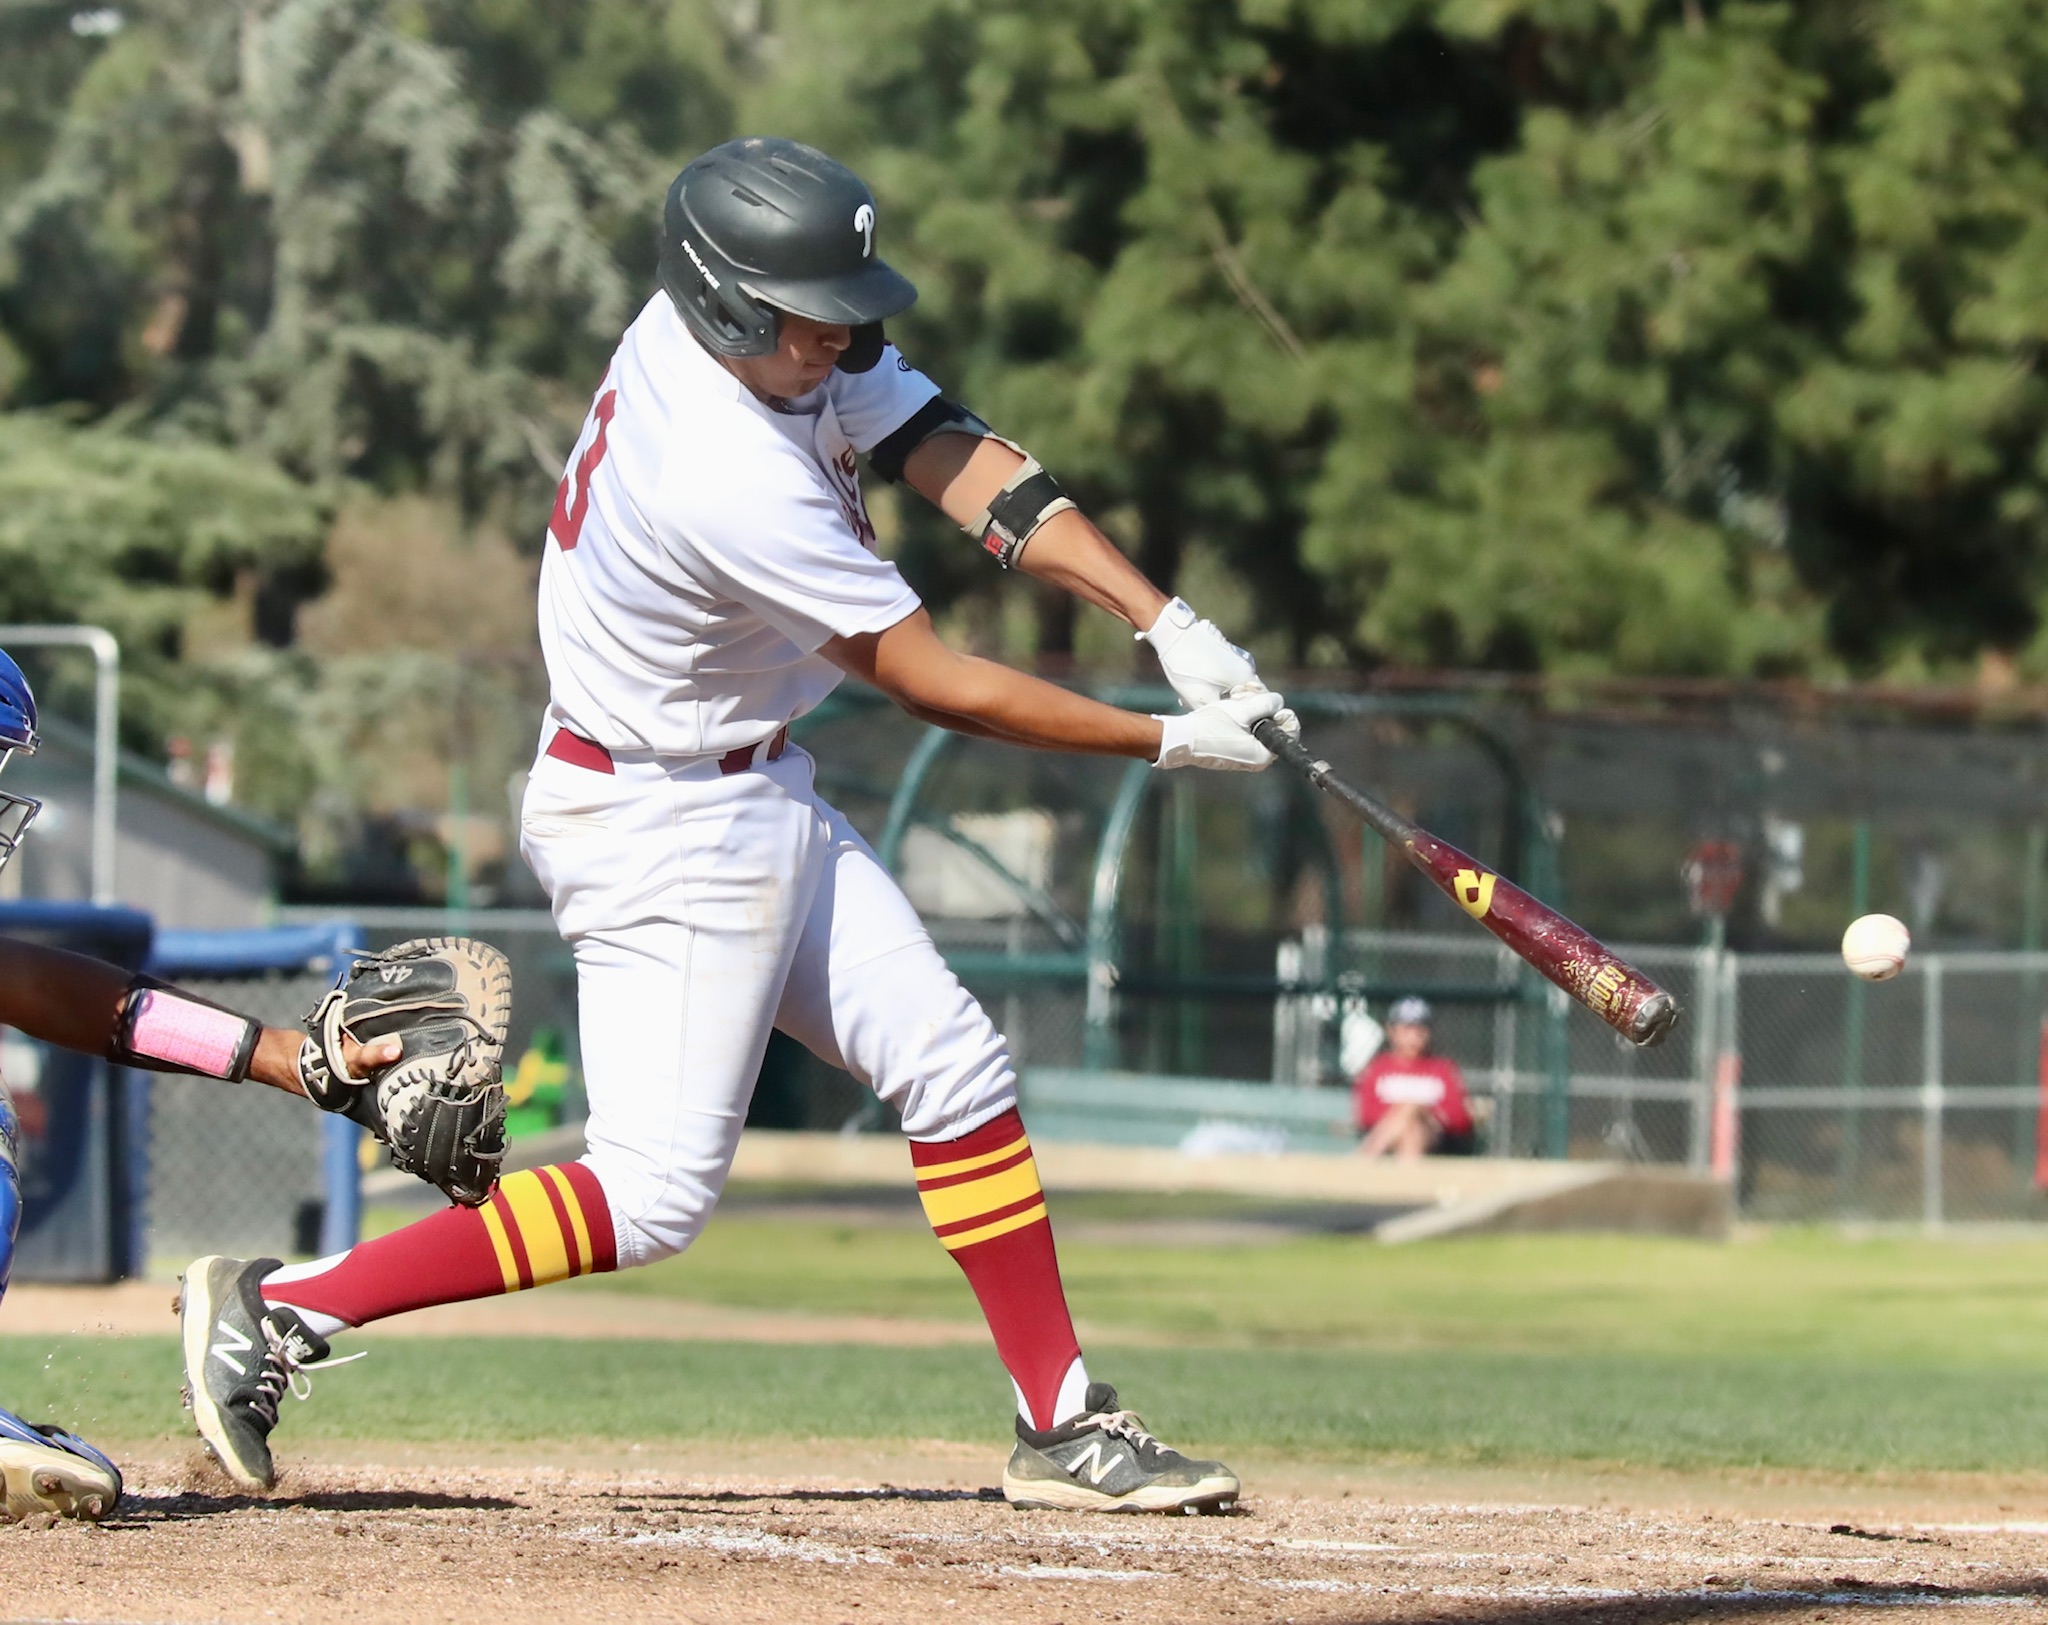 Raider Tello lines one of his five hits during PCC's 17-1 win over LA Harbor on Monday (photo by Michael Watkins, Athletics).